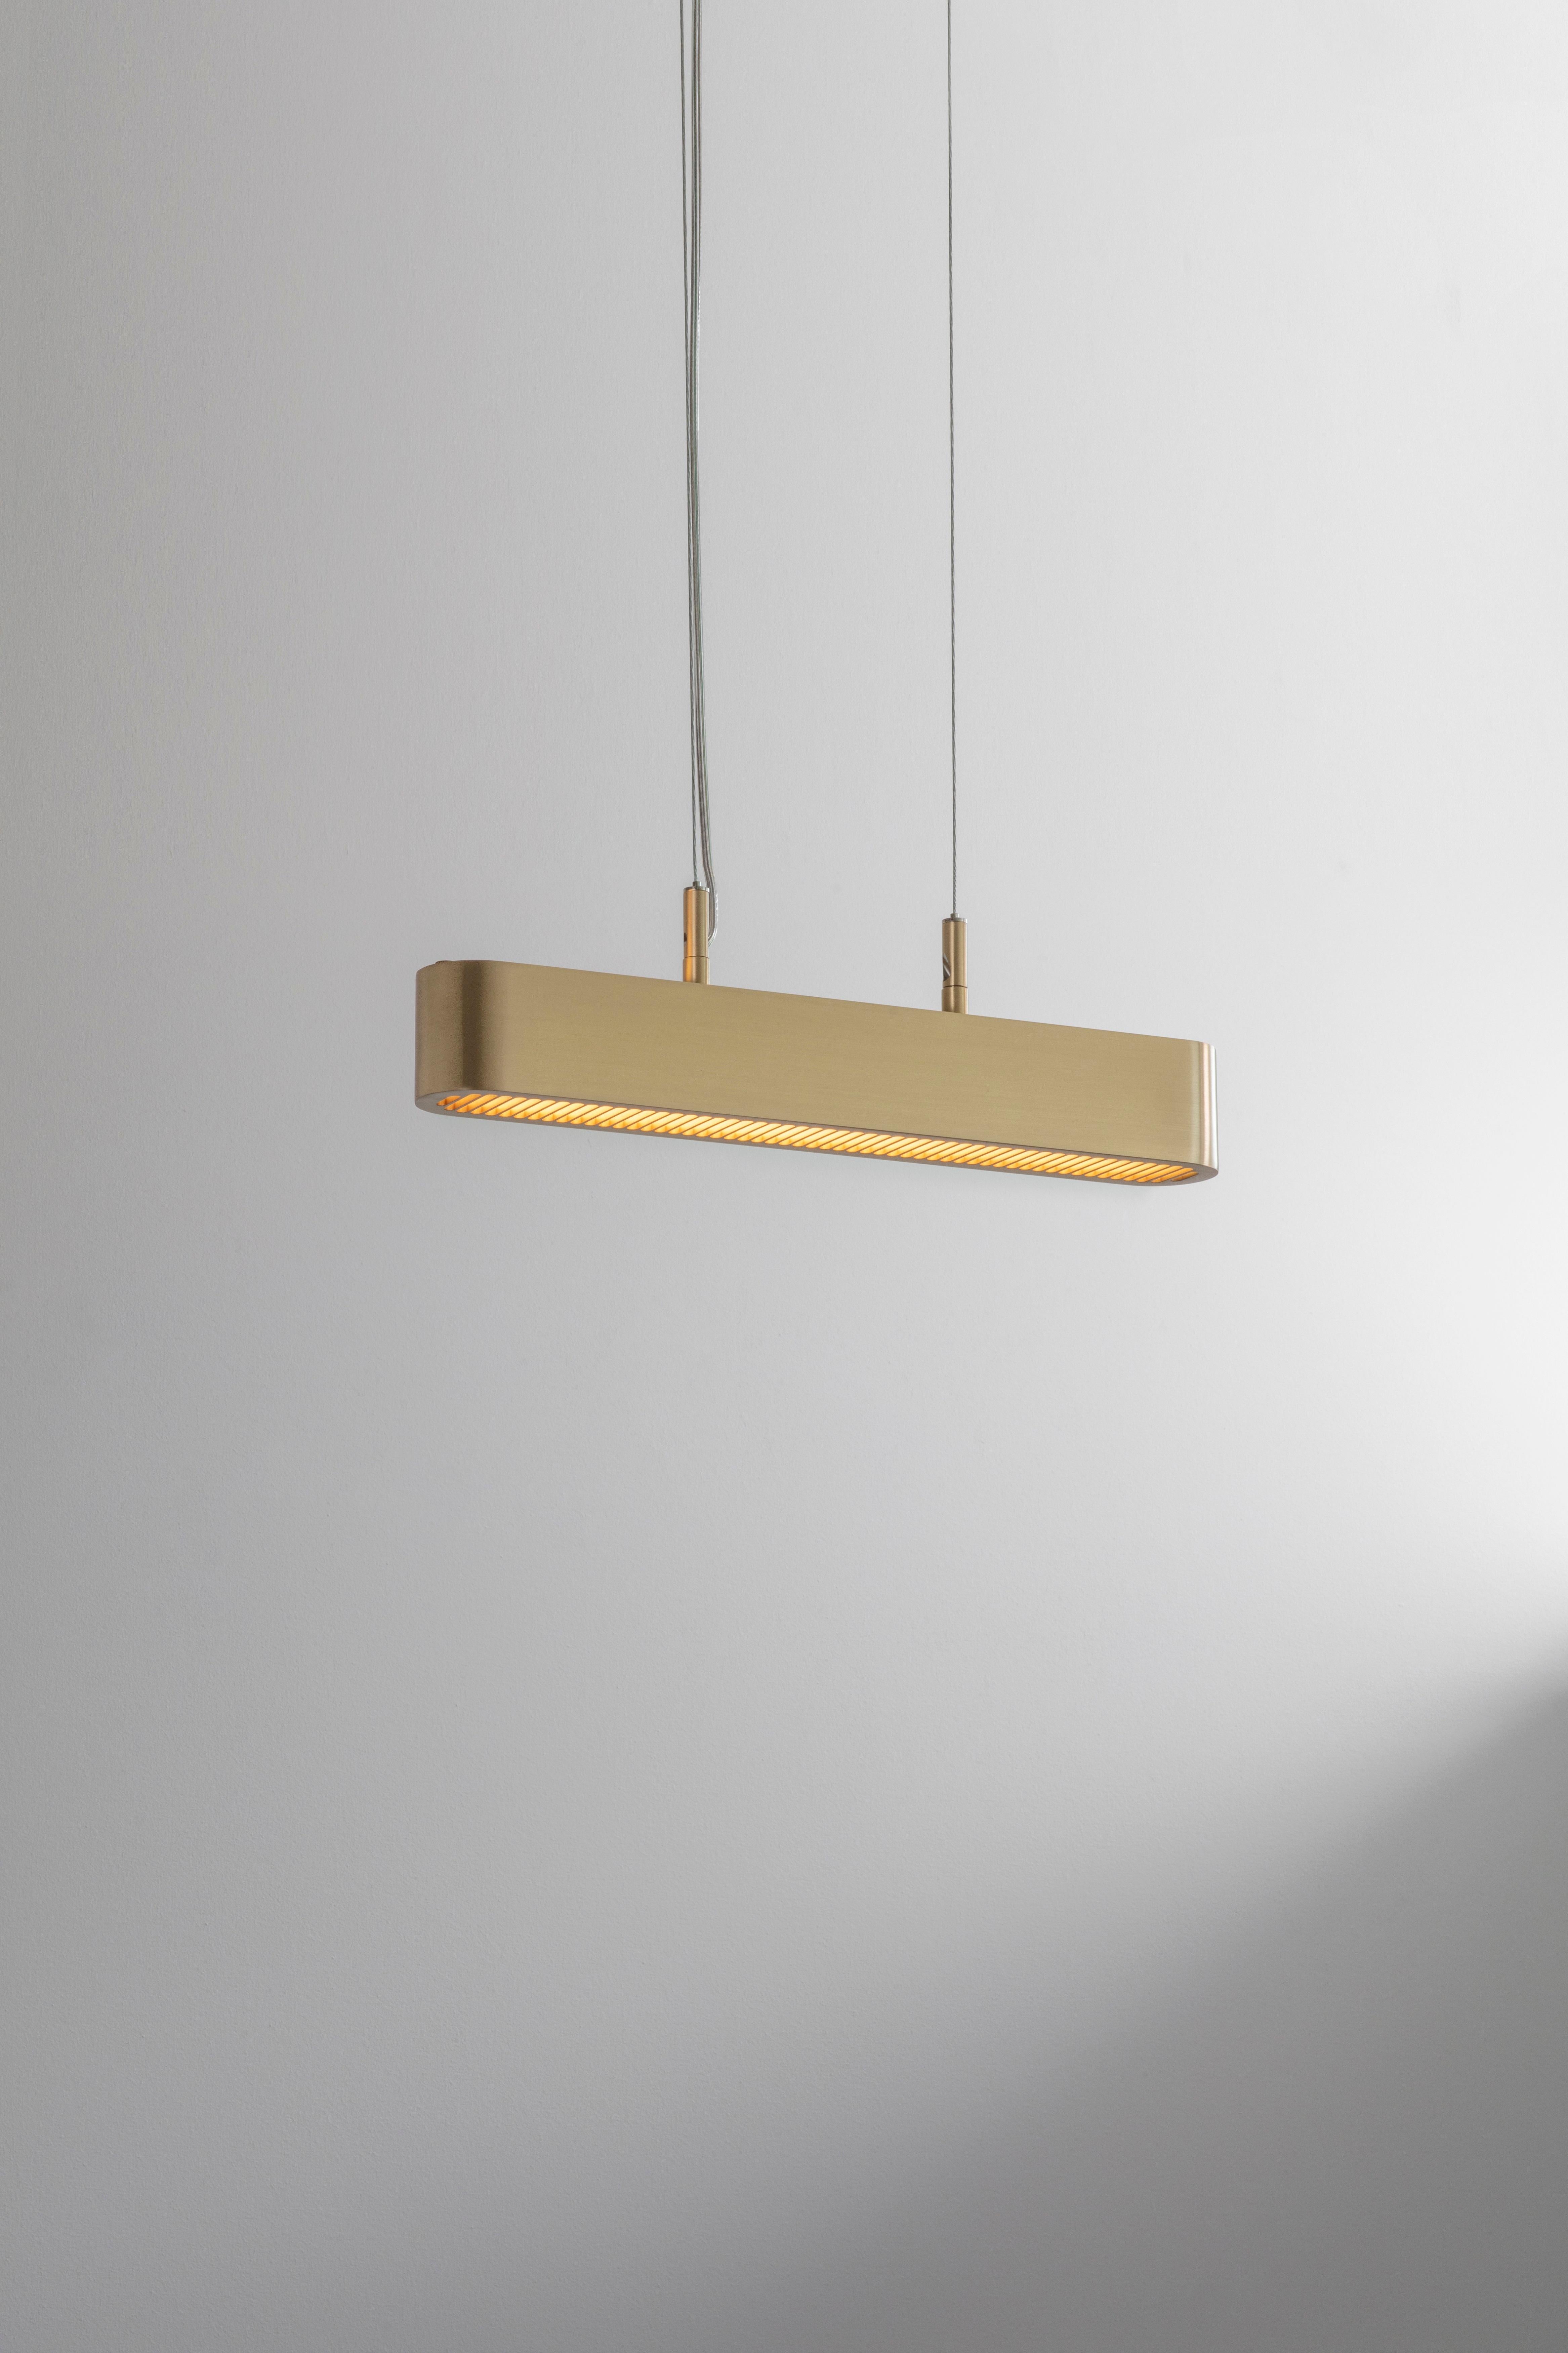 Colt pendant light single by Bert Frank
Dimensions: 9 x 6 x H 41 cm 
Materials: brass


All our lamps can be wired according to each country. If sold to the USA it will be wired for the USA for instance.

When Adam Yeats and Robbie Llewellyn